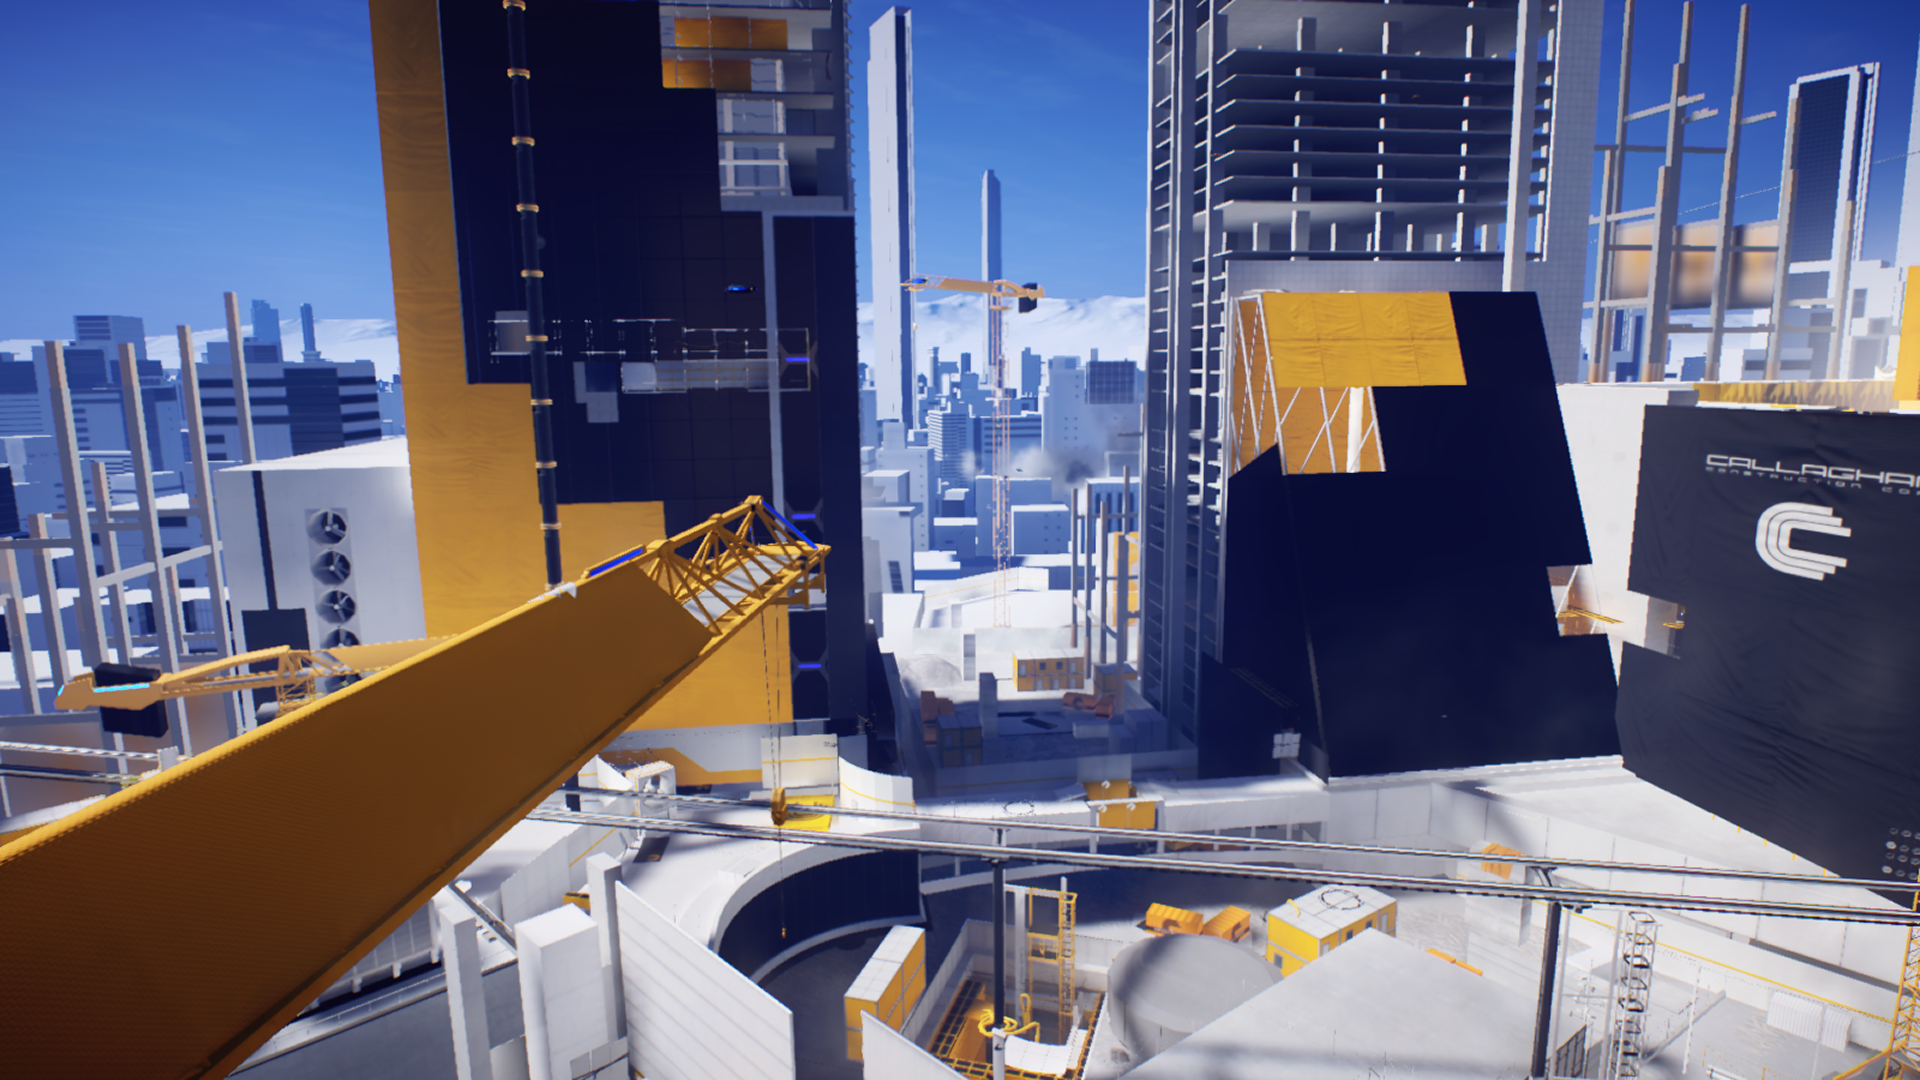 New Game Mirror's Edge Catalyst will be set in the Dystopic Future Nation  of Cascadia — CascadiaNow!